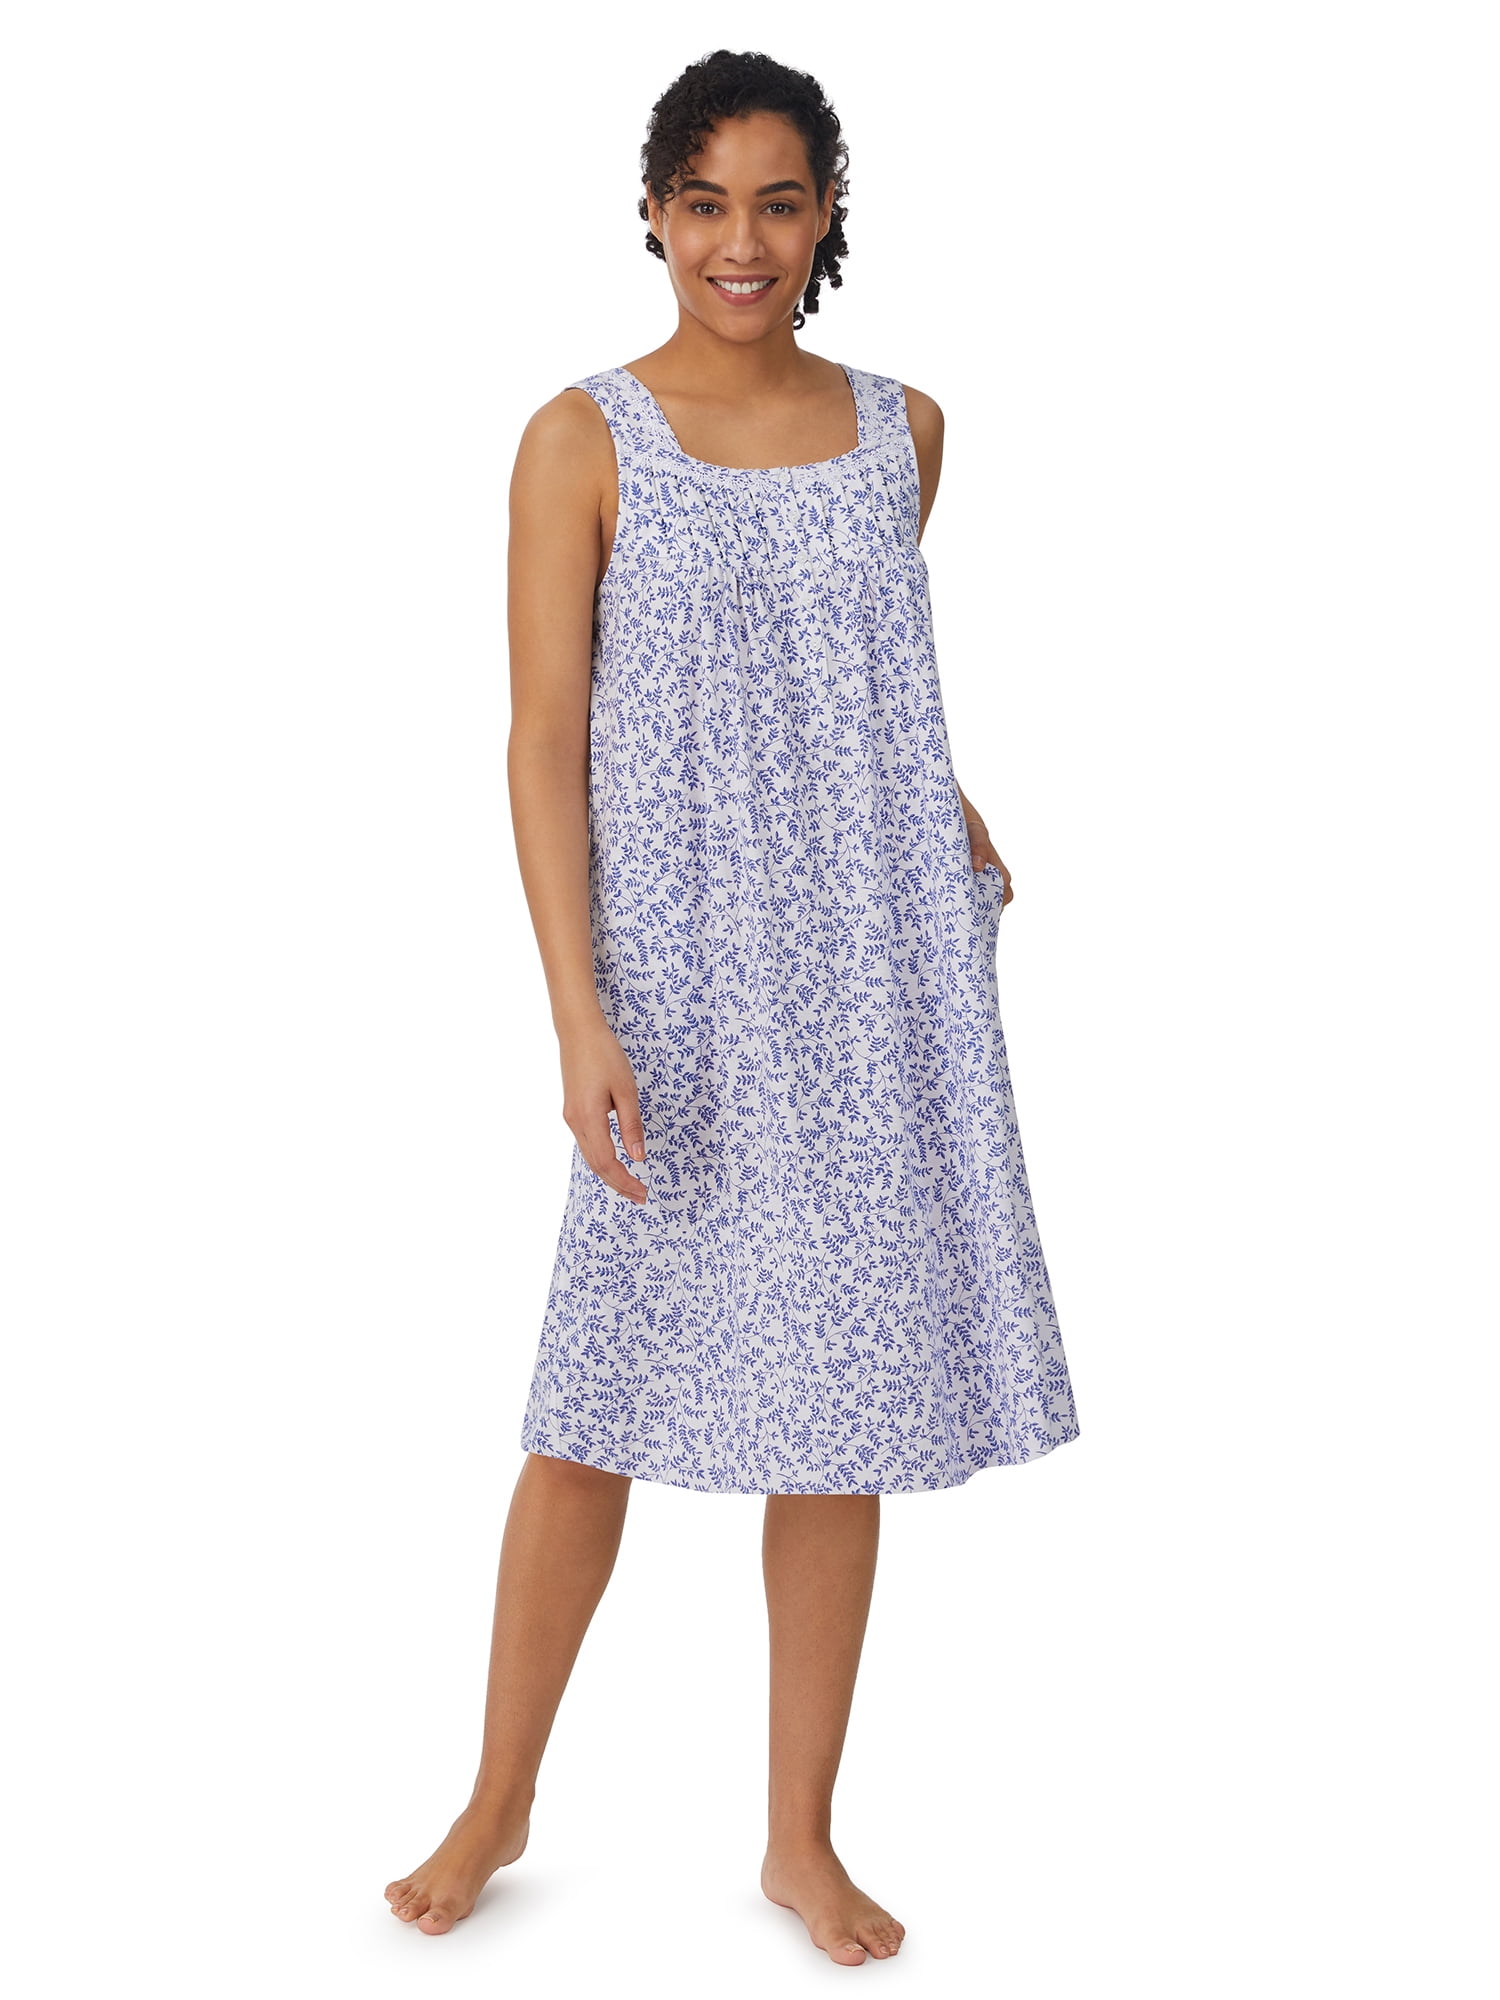 Dreamcrest 100% Cotton Sleeveless Nightgown for Women with Crochet